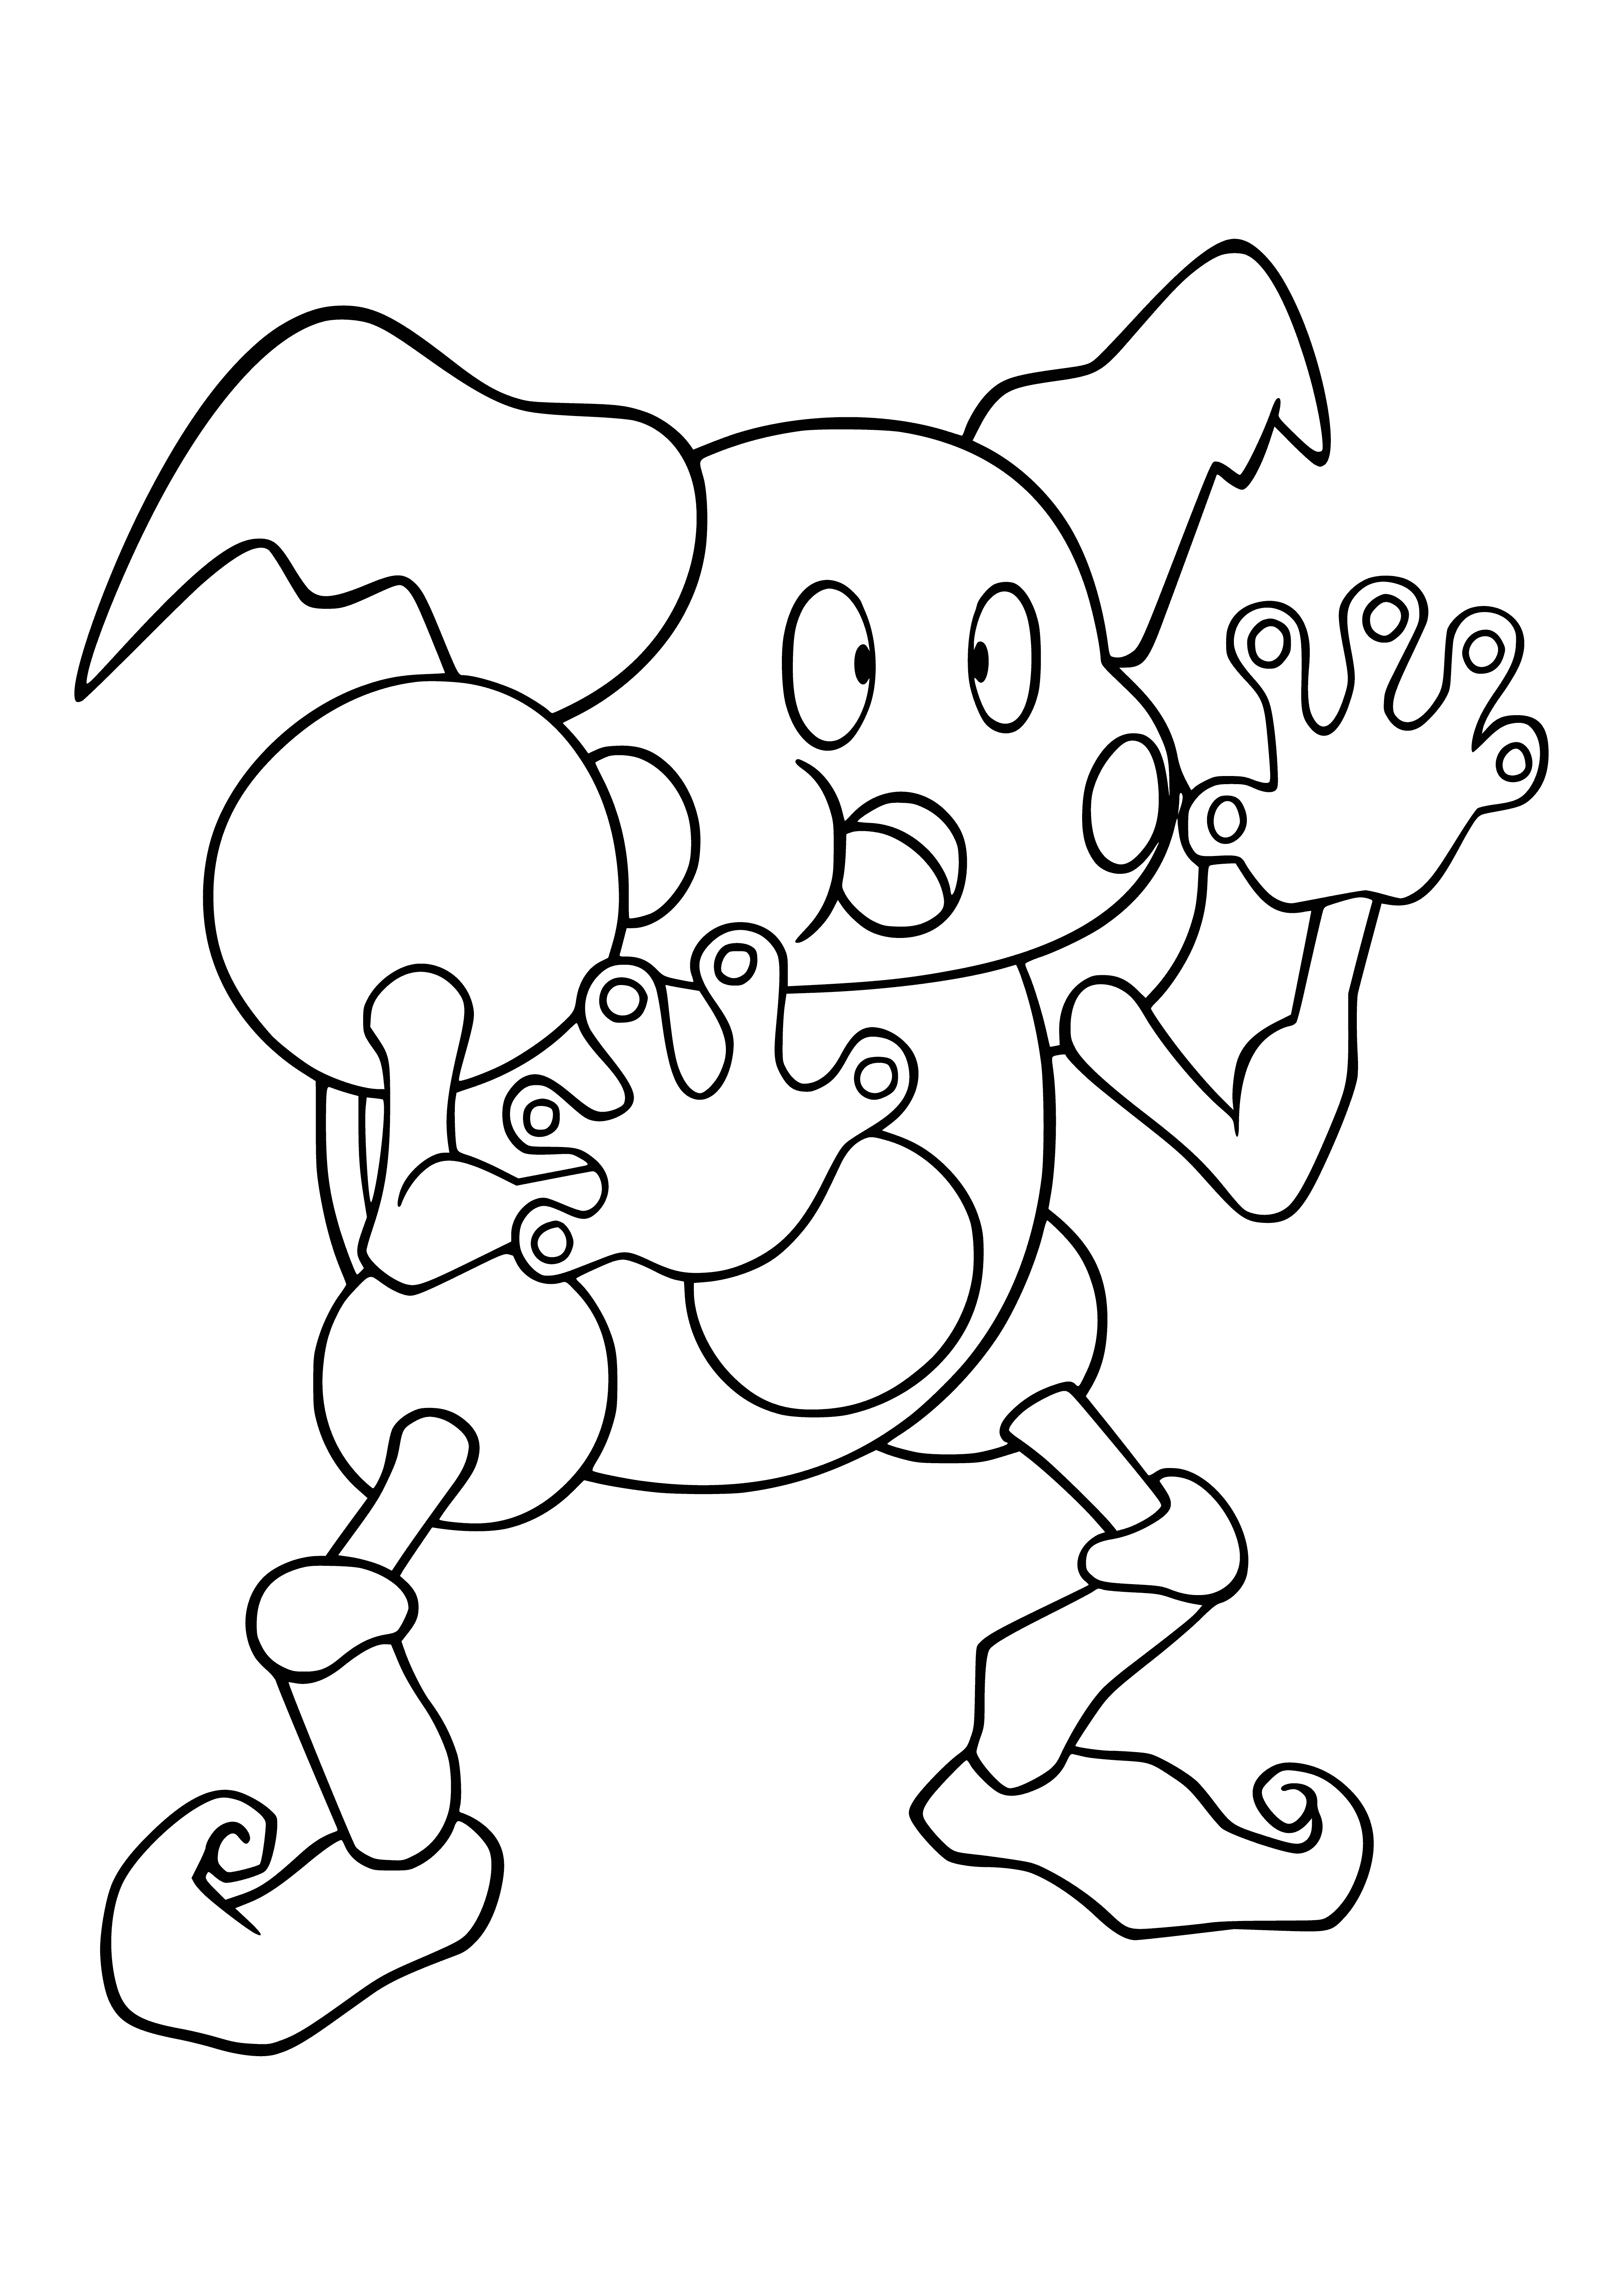 Pokemon Mister Mime coloring page